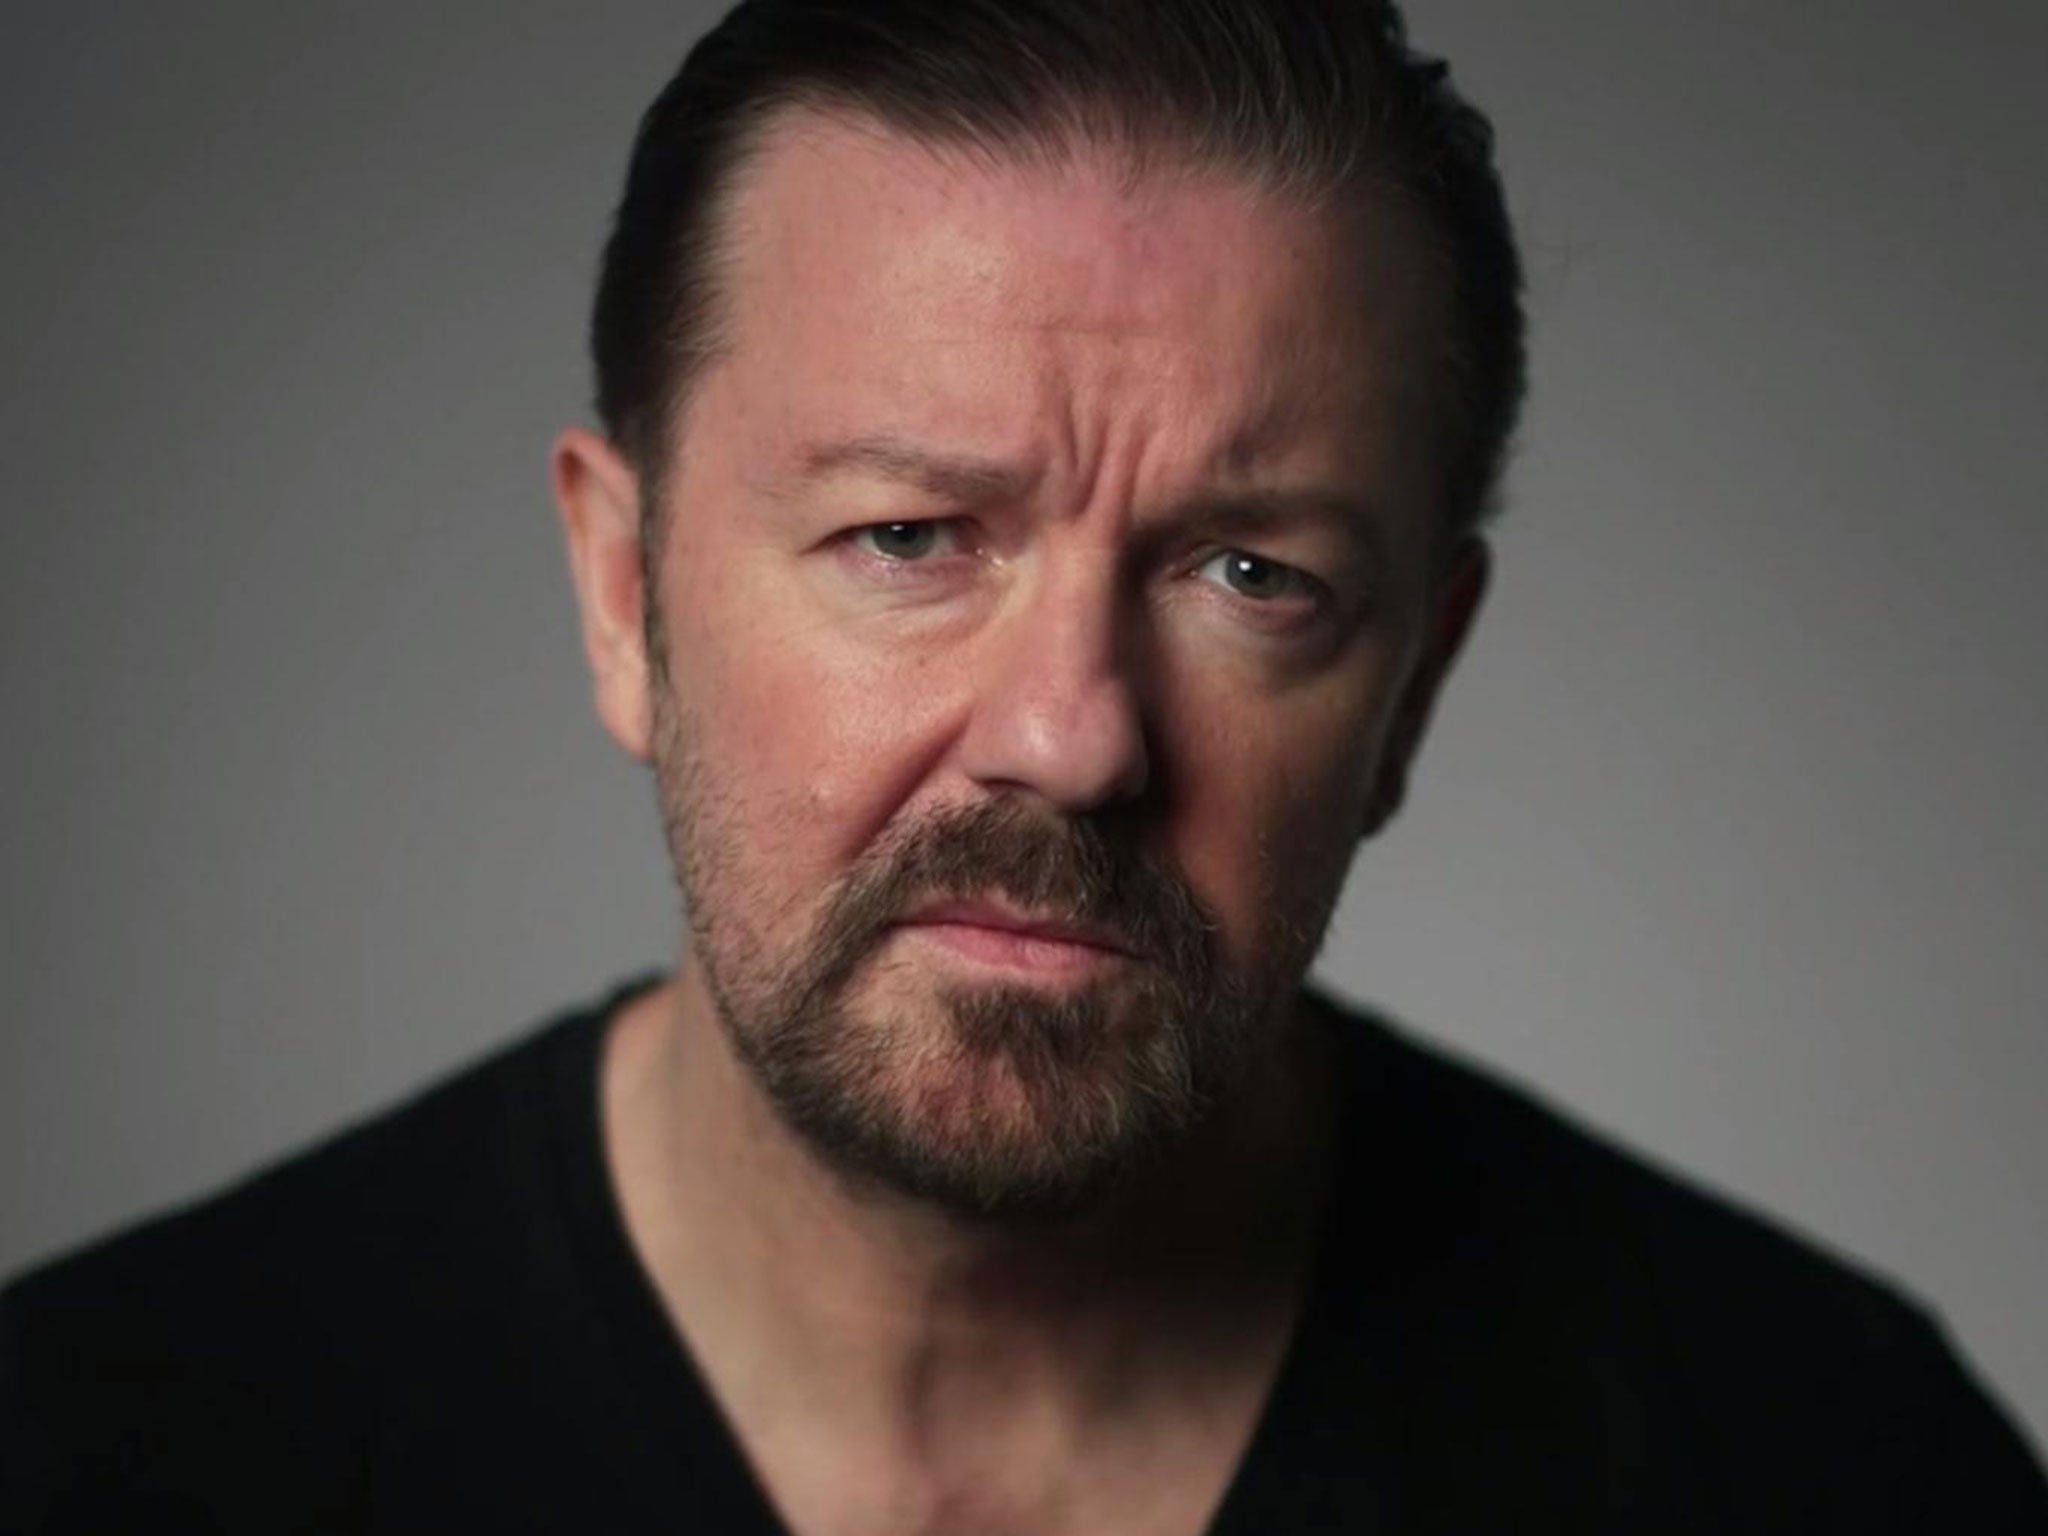 Ricky Gervais has defended his tweets